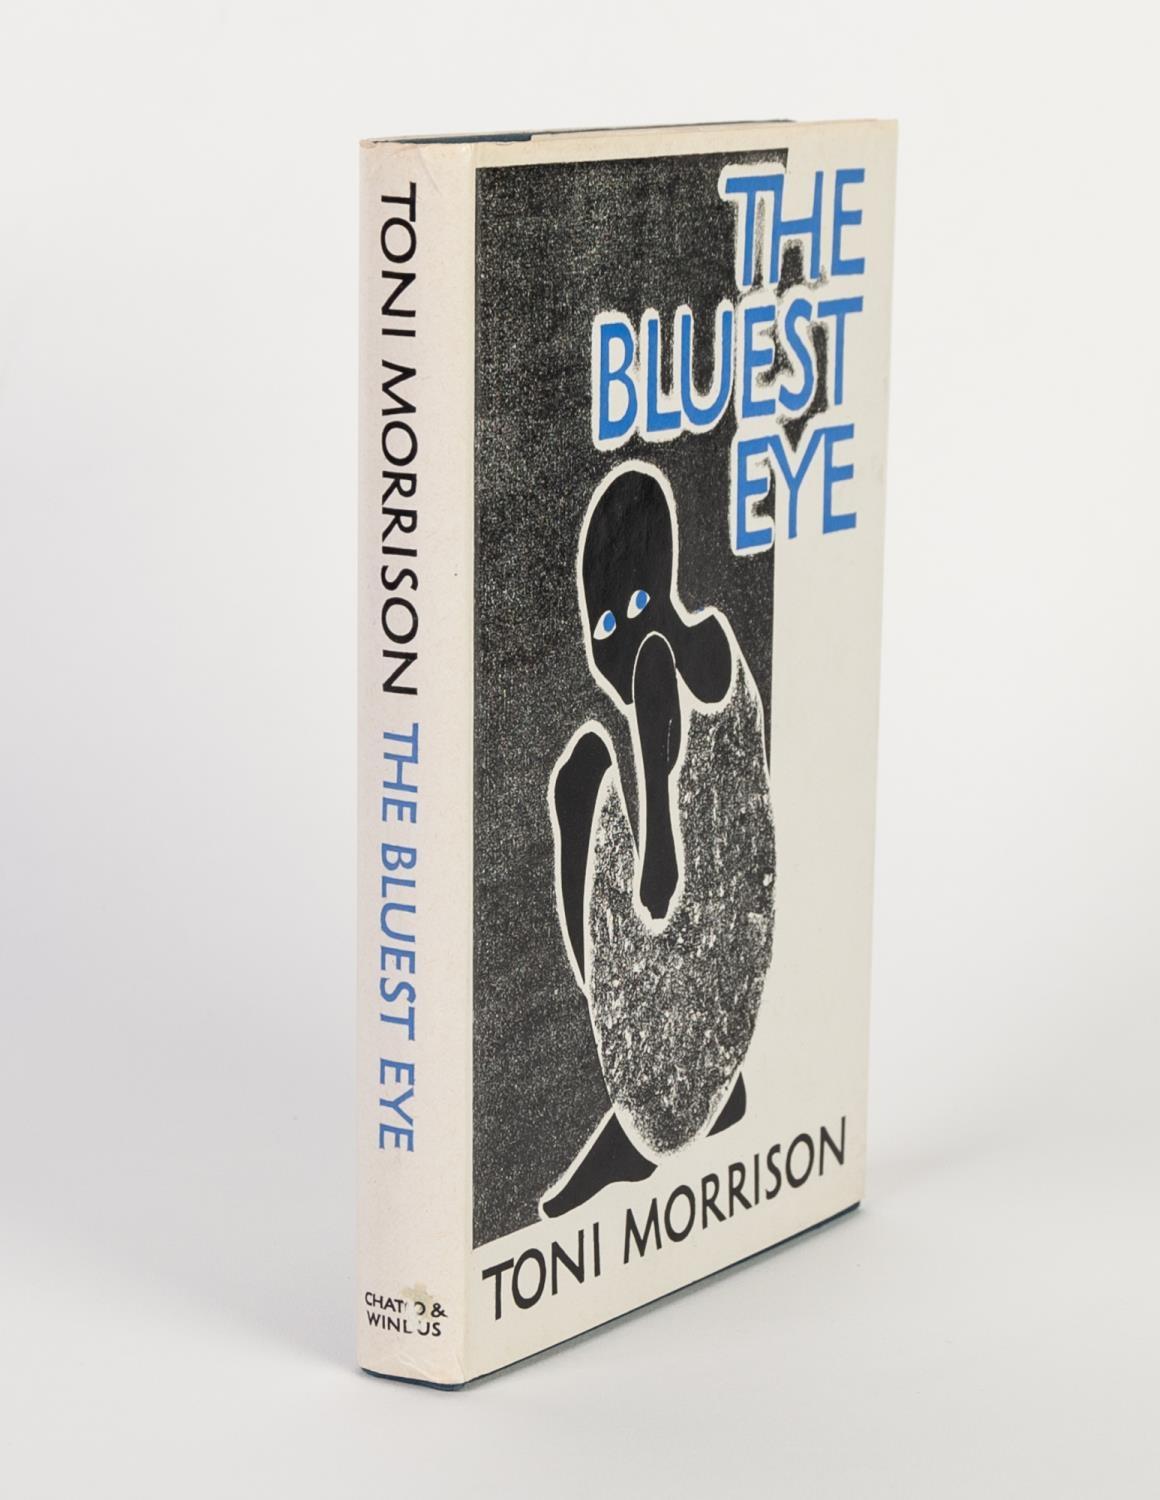 TONI MORRISON - THE BLUEST EYE published Chatto and Windus 1979 first UK edition with original